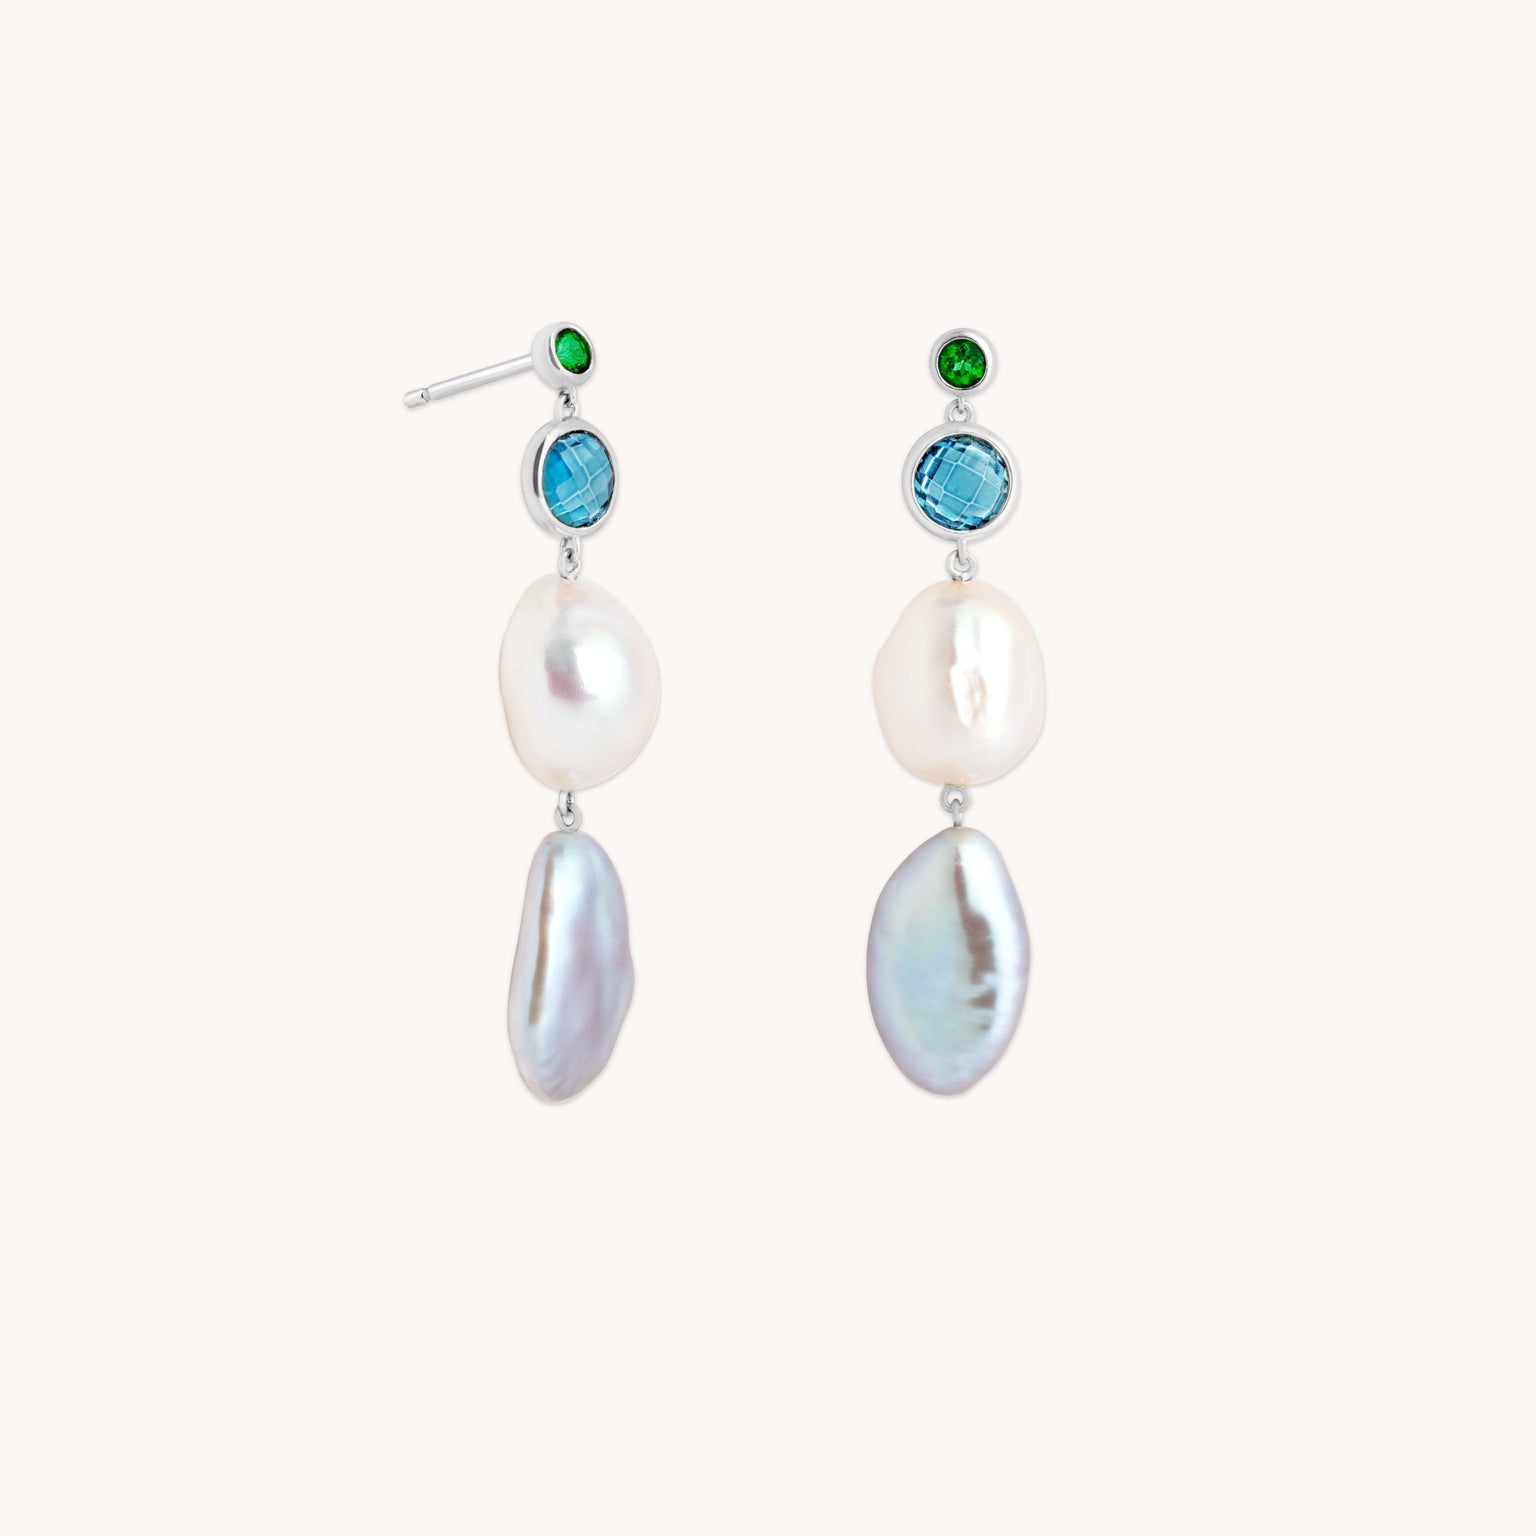 Tranquility Pearl Drop Studs in Silver